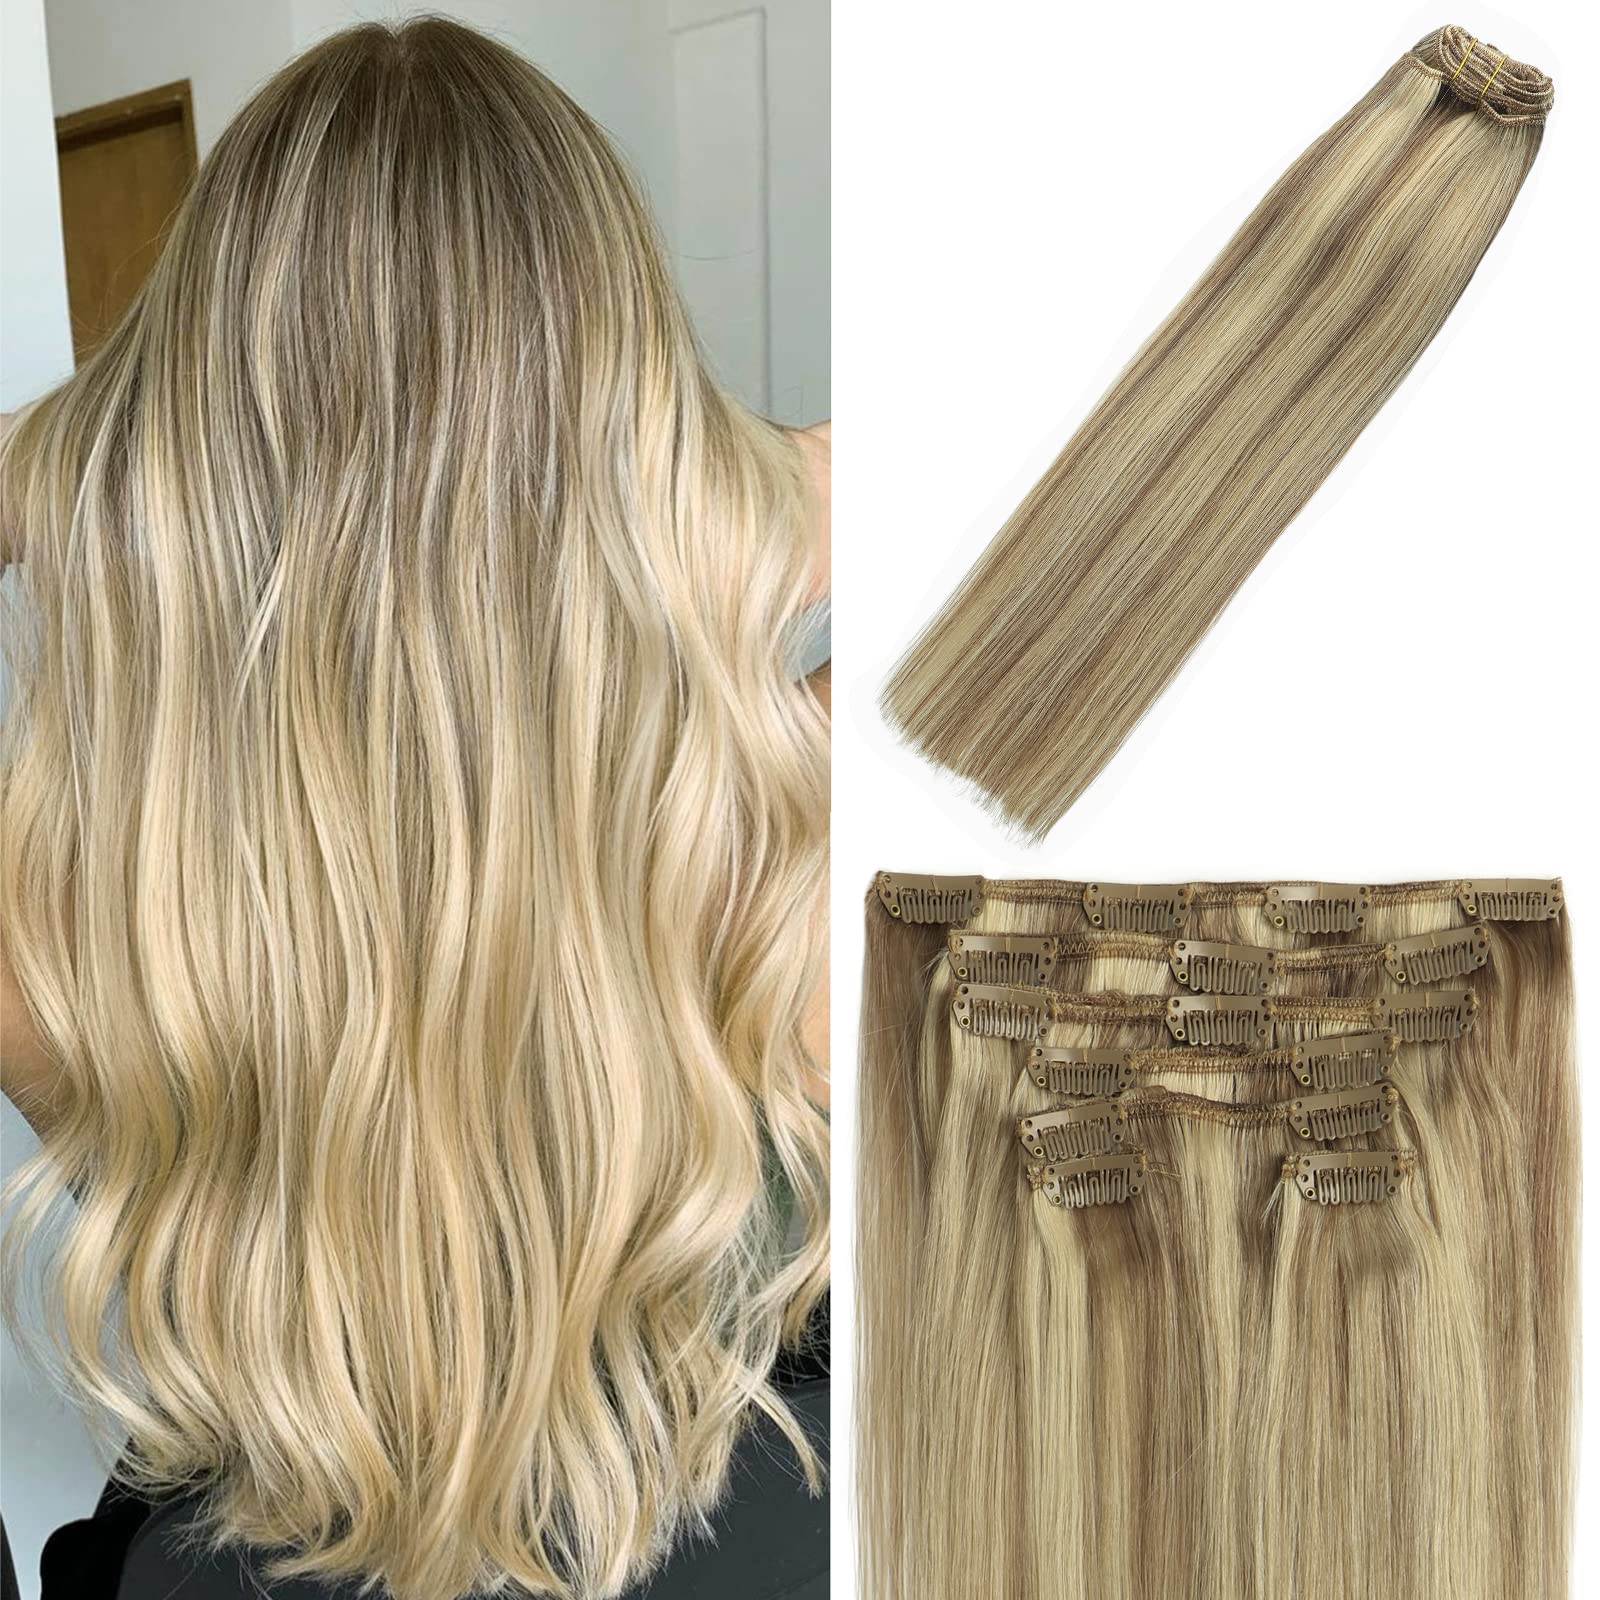 ombre-weft-hair-extensions-new-products-stand-out-among-the-current-products-of-the-global-hair-extensions-market